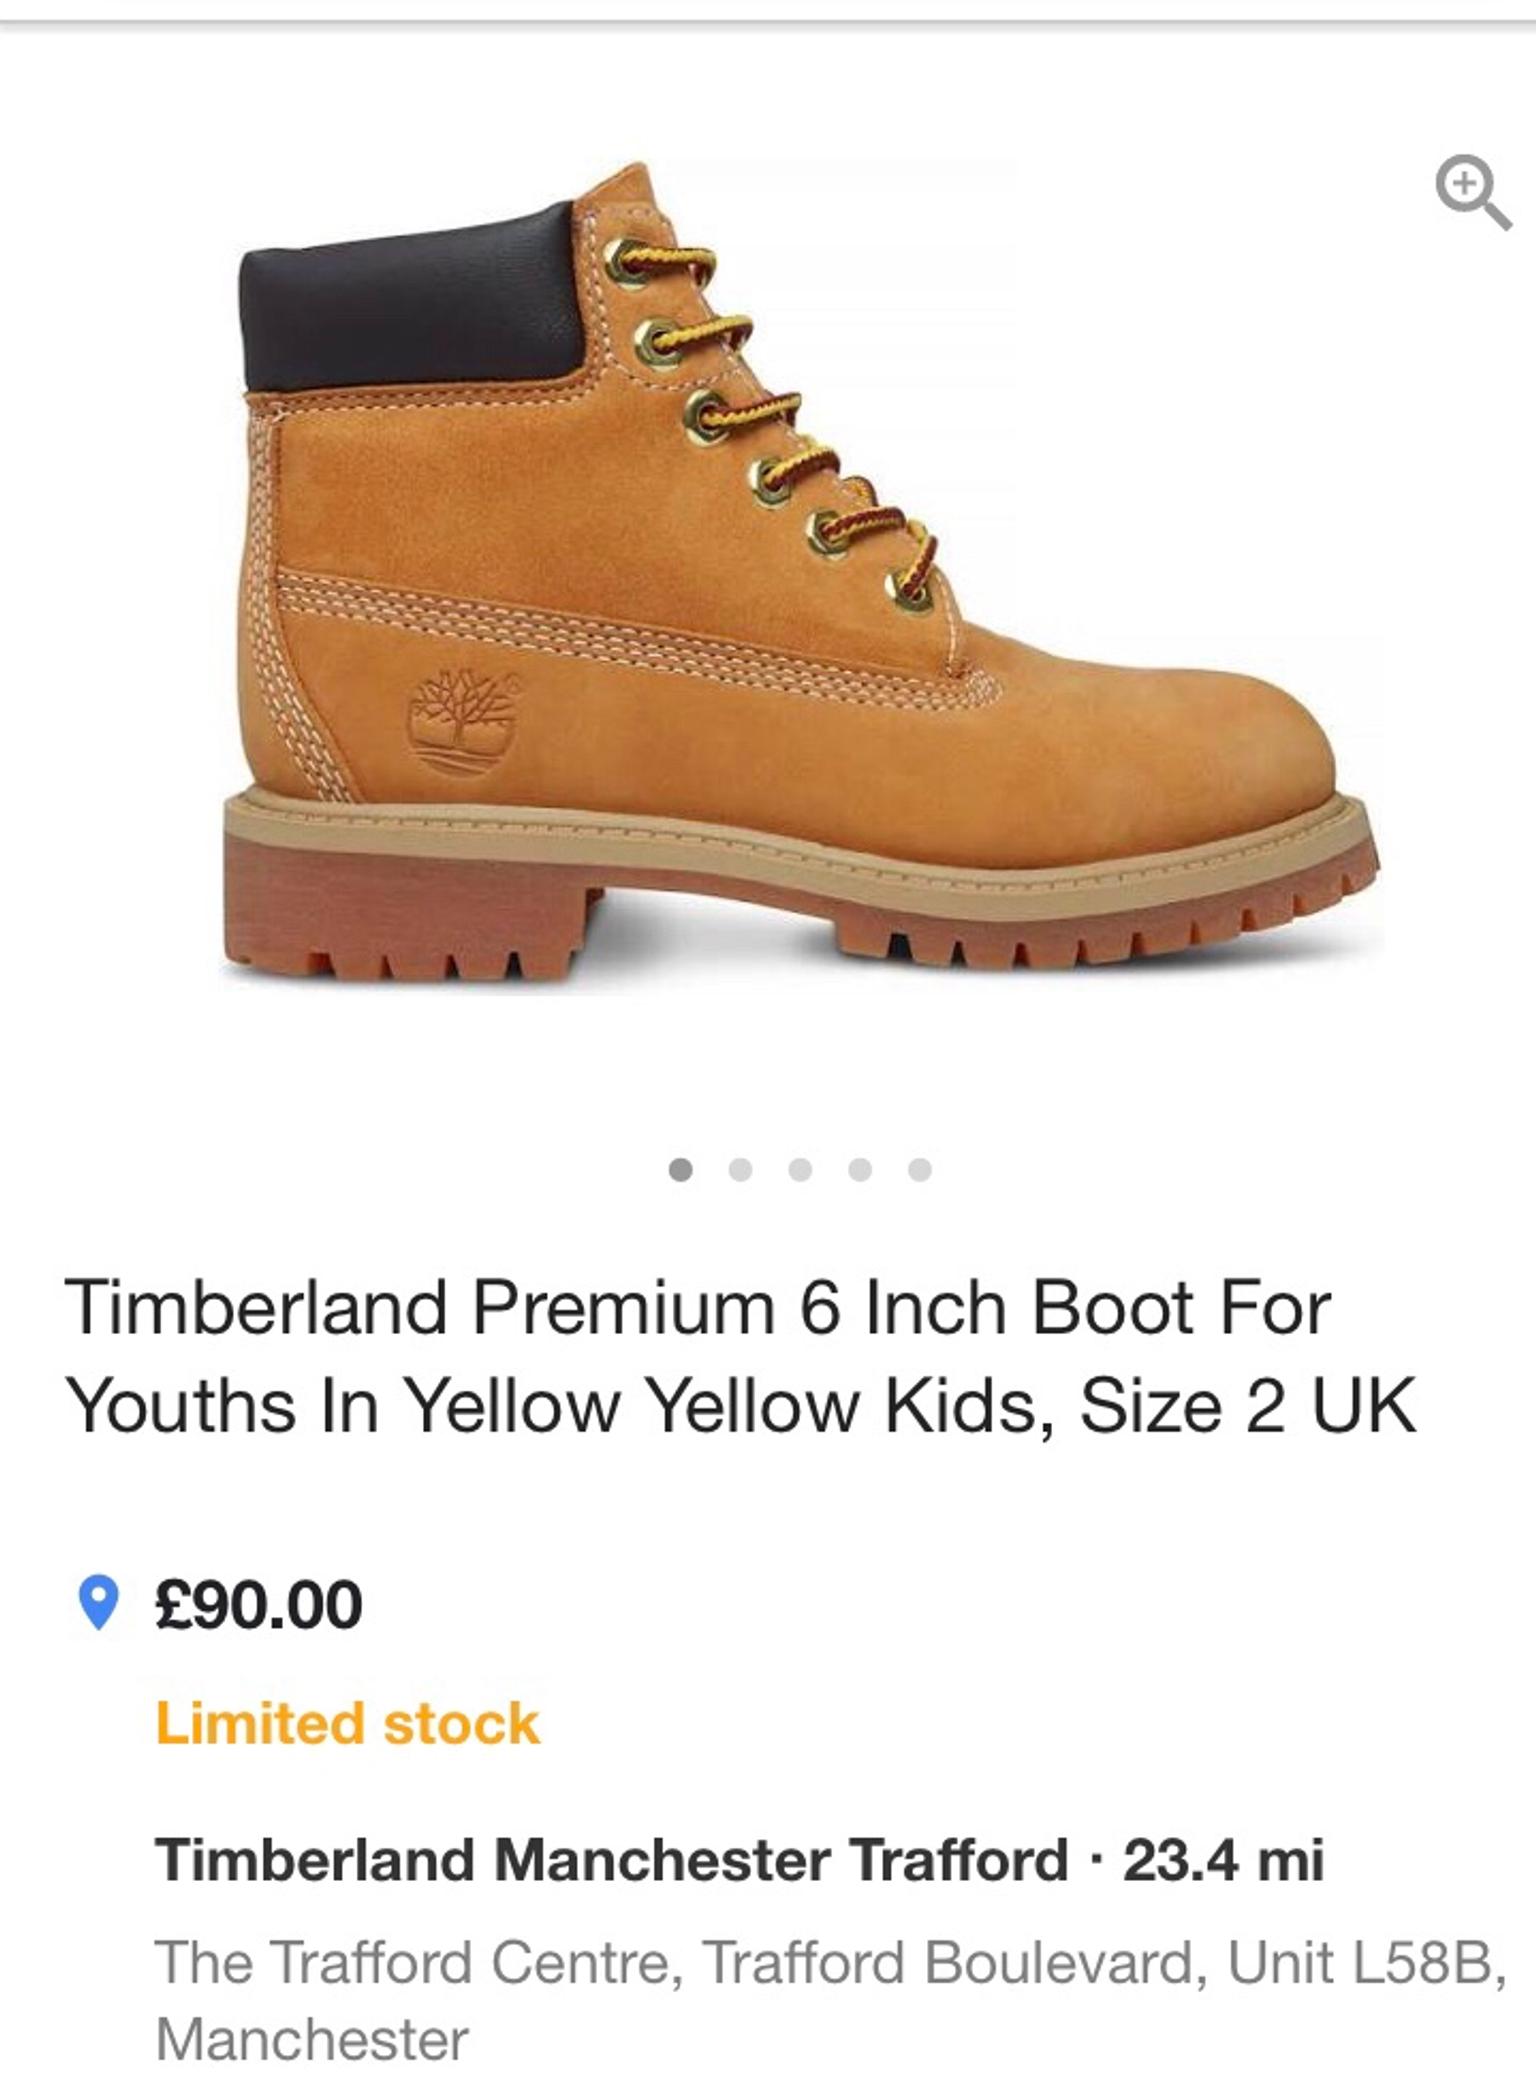 Young girls genuine Timberland suede 